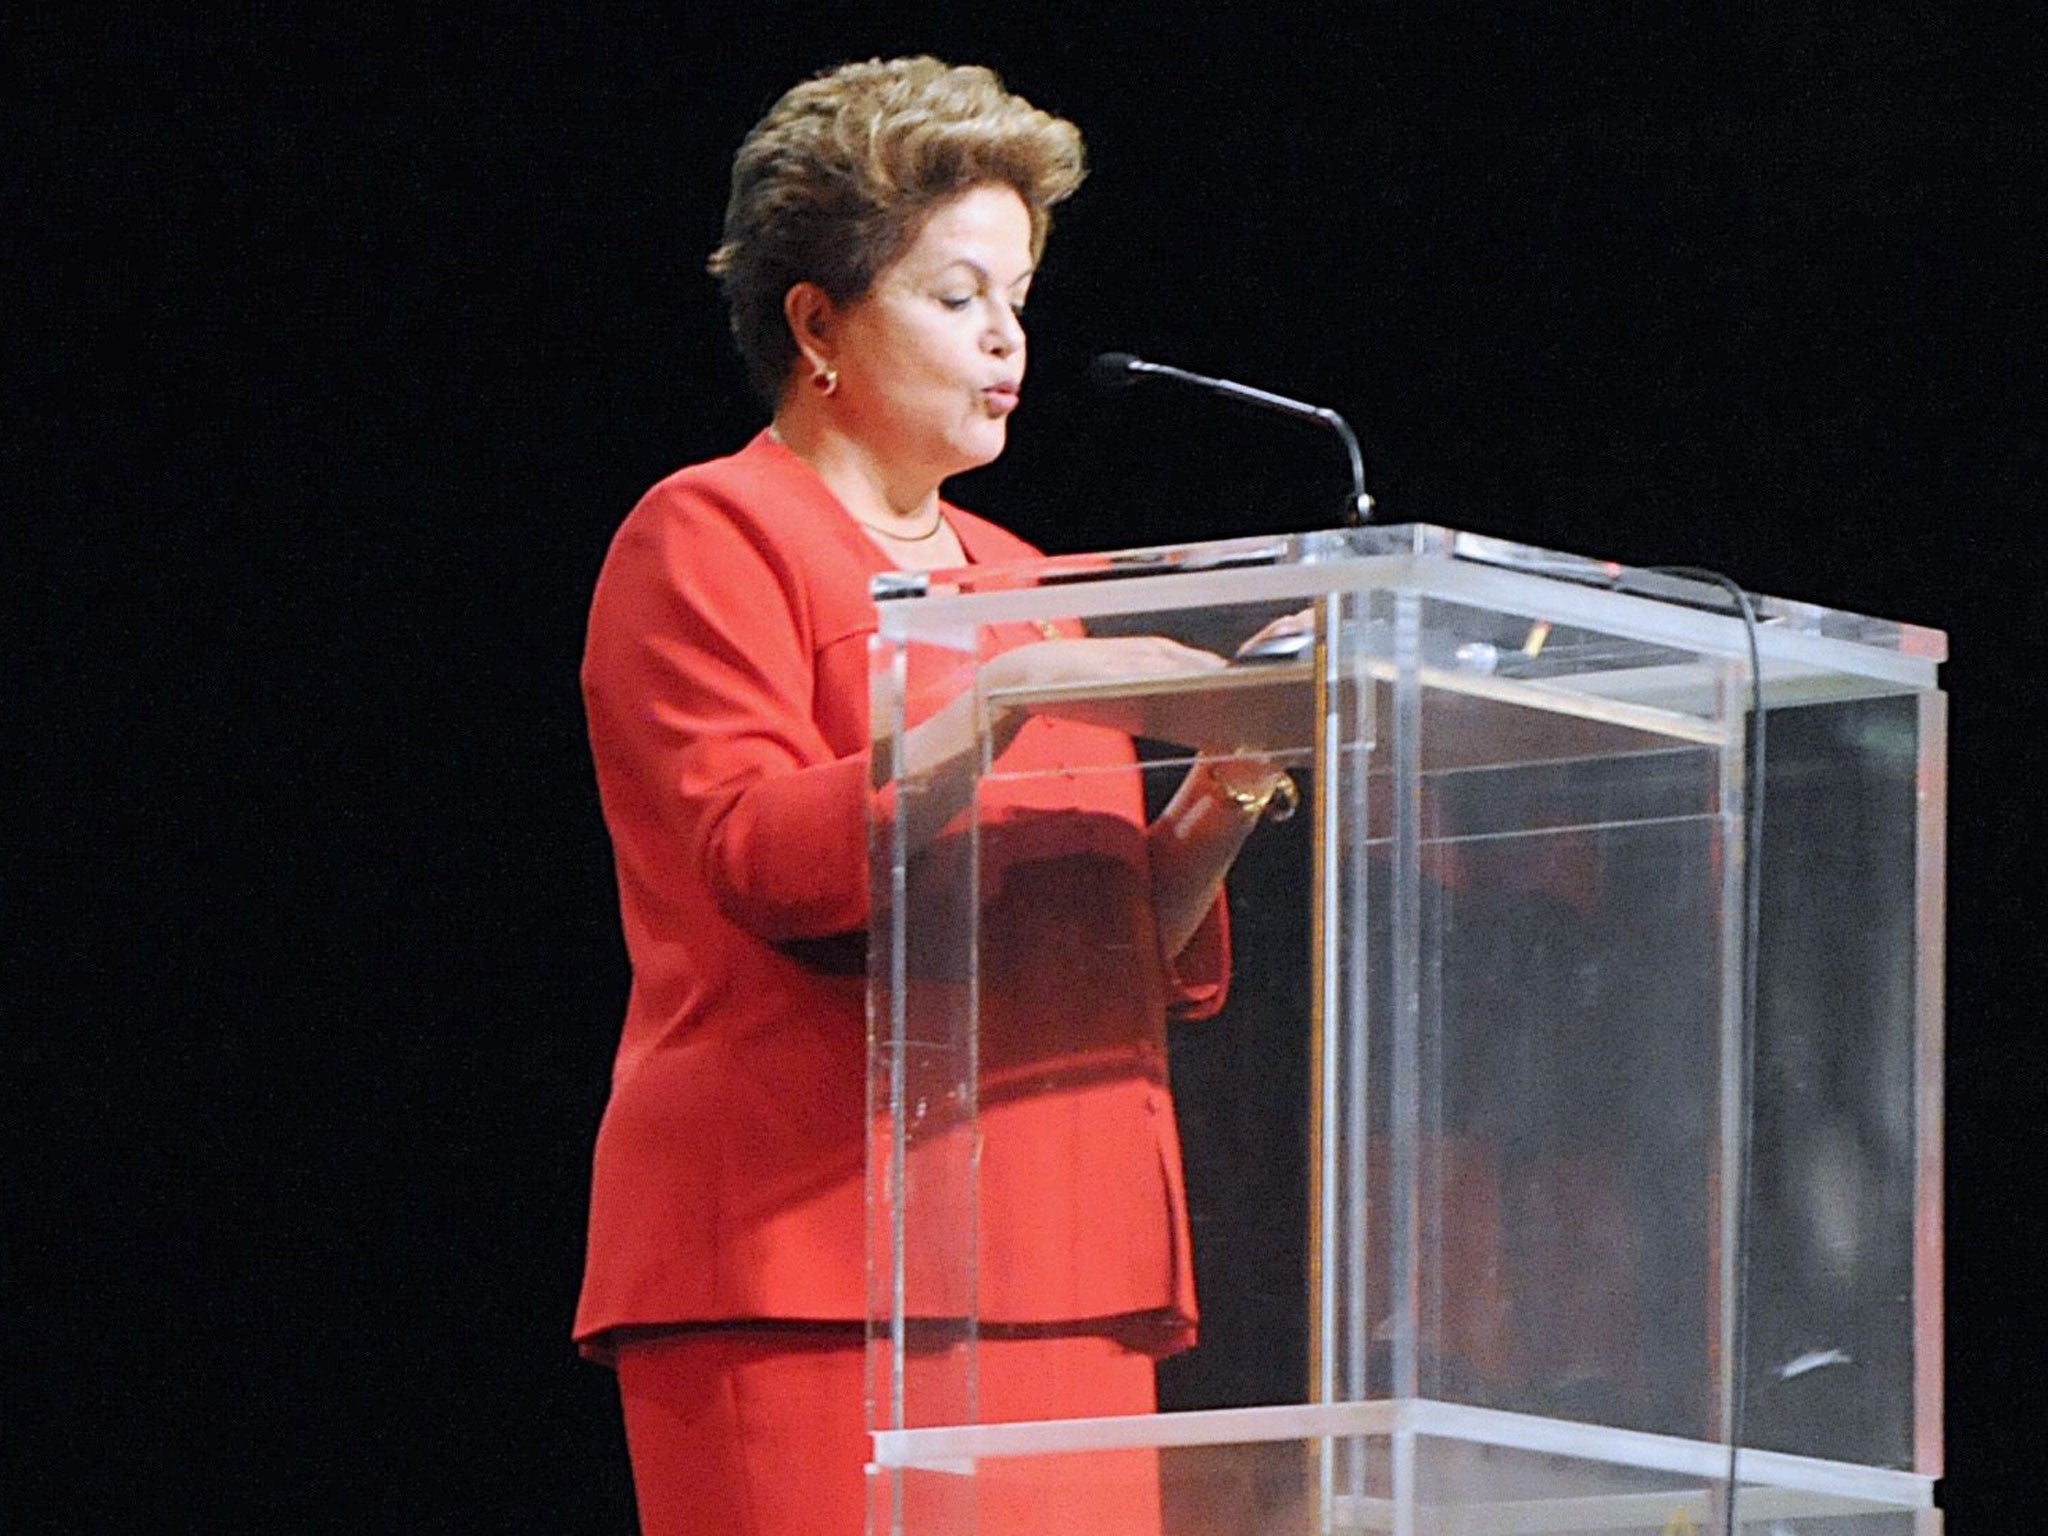 President Dilma Rousseff is set to announce a new development agency that will offer assistance to African countries